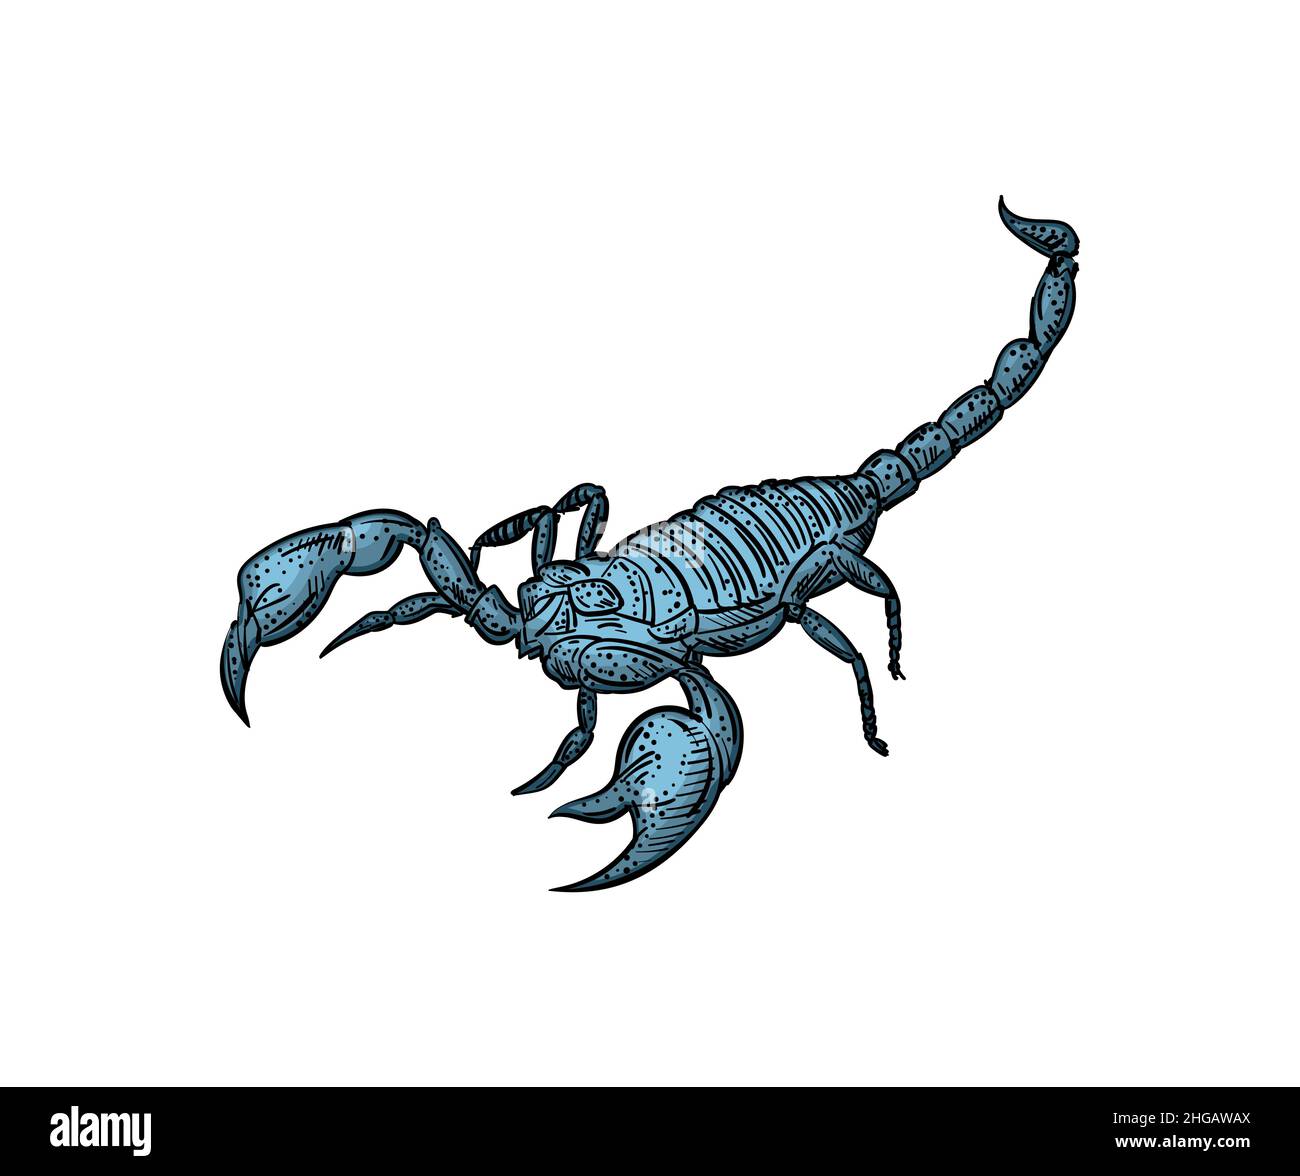 Scorpion Sketch Tattoo Vector Images over 300